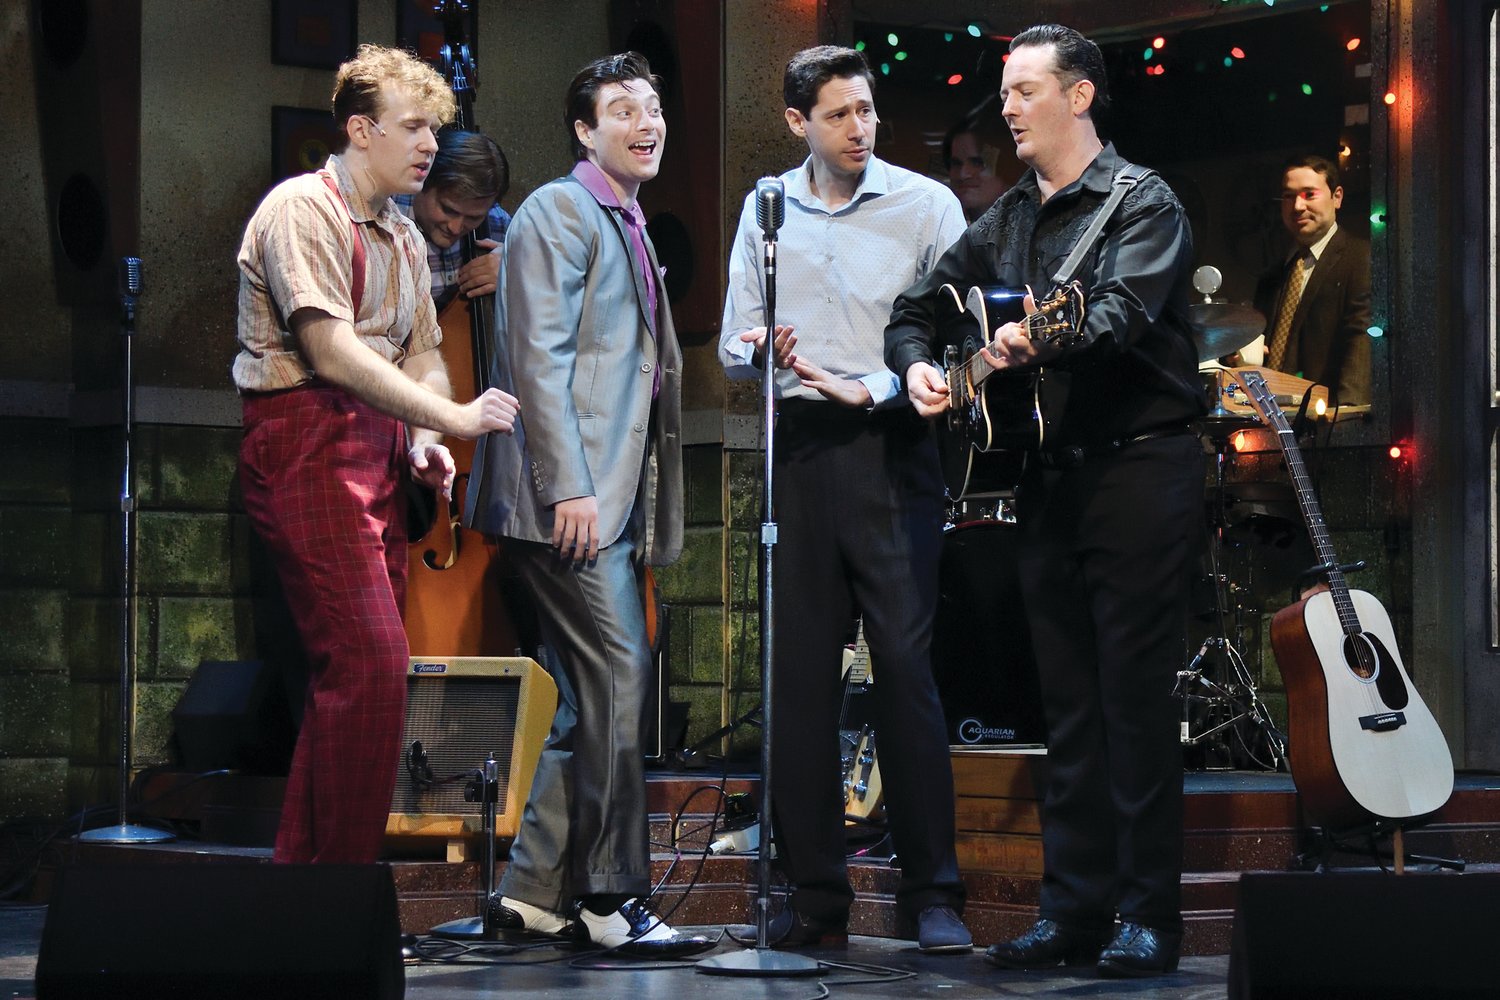 The cast of “Million Dollar Quartet” playing at Theatre By The Sea thru June 18, 2022.